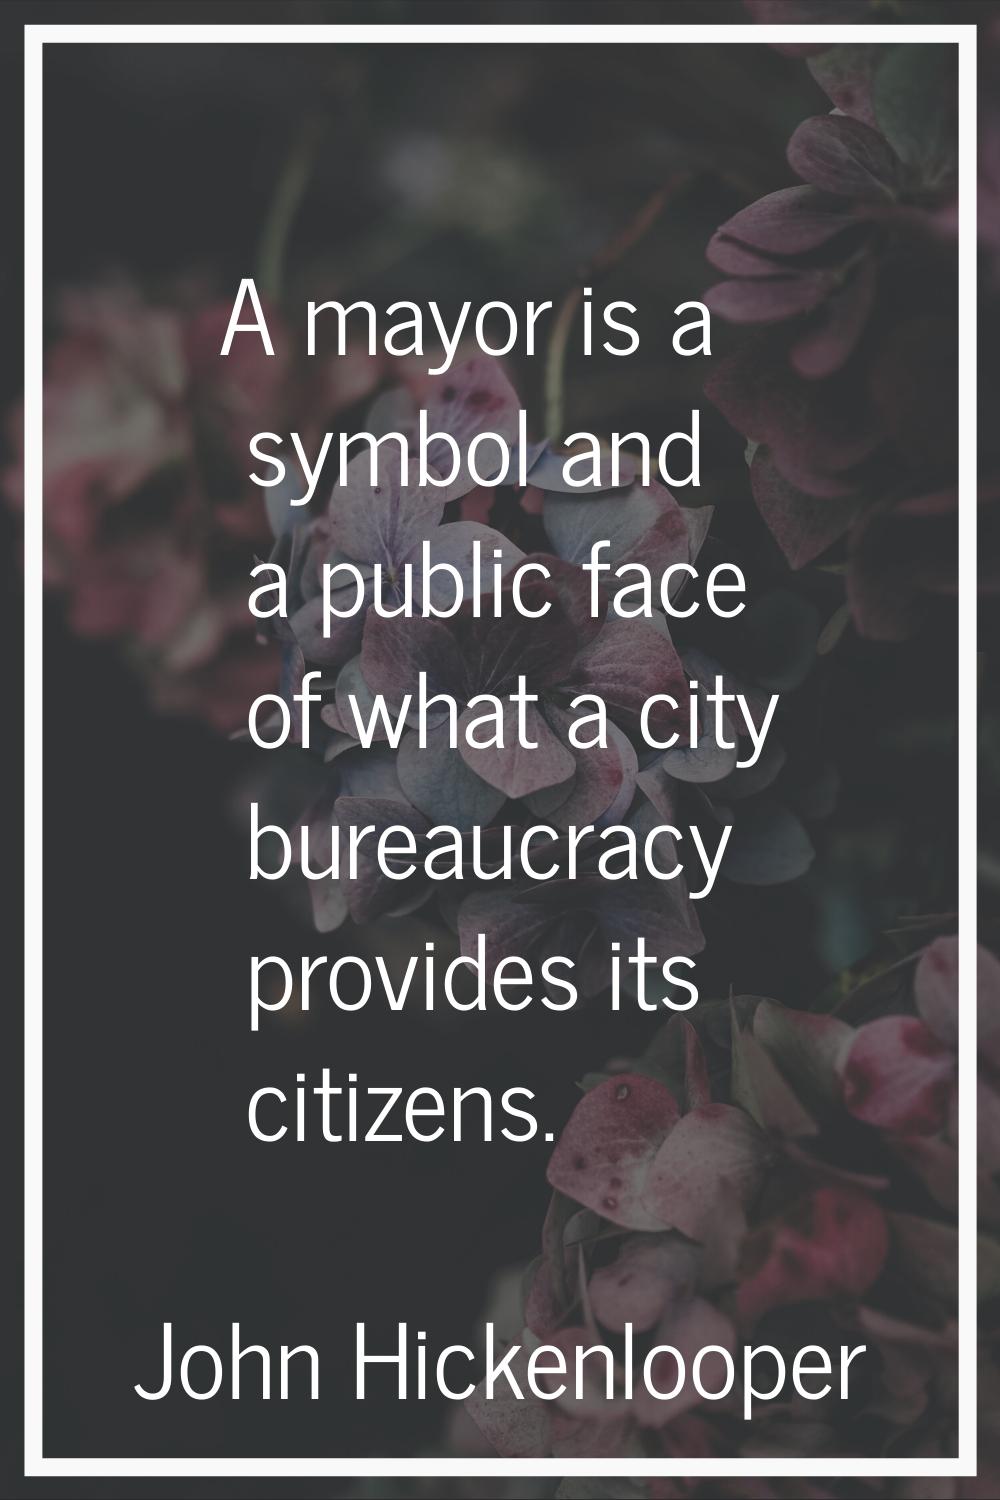 A mayor is a symbol and a public face of what a city bureaucracy provides its citizens.